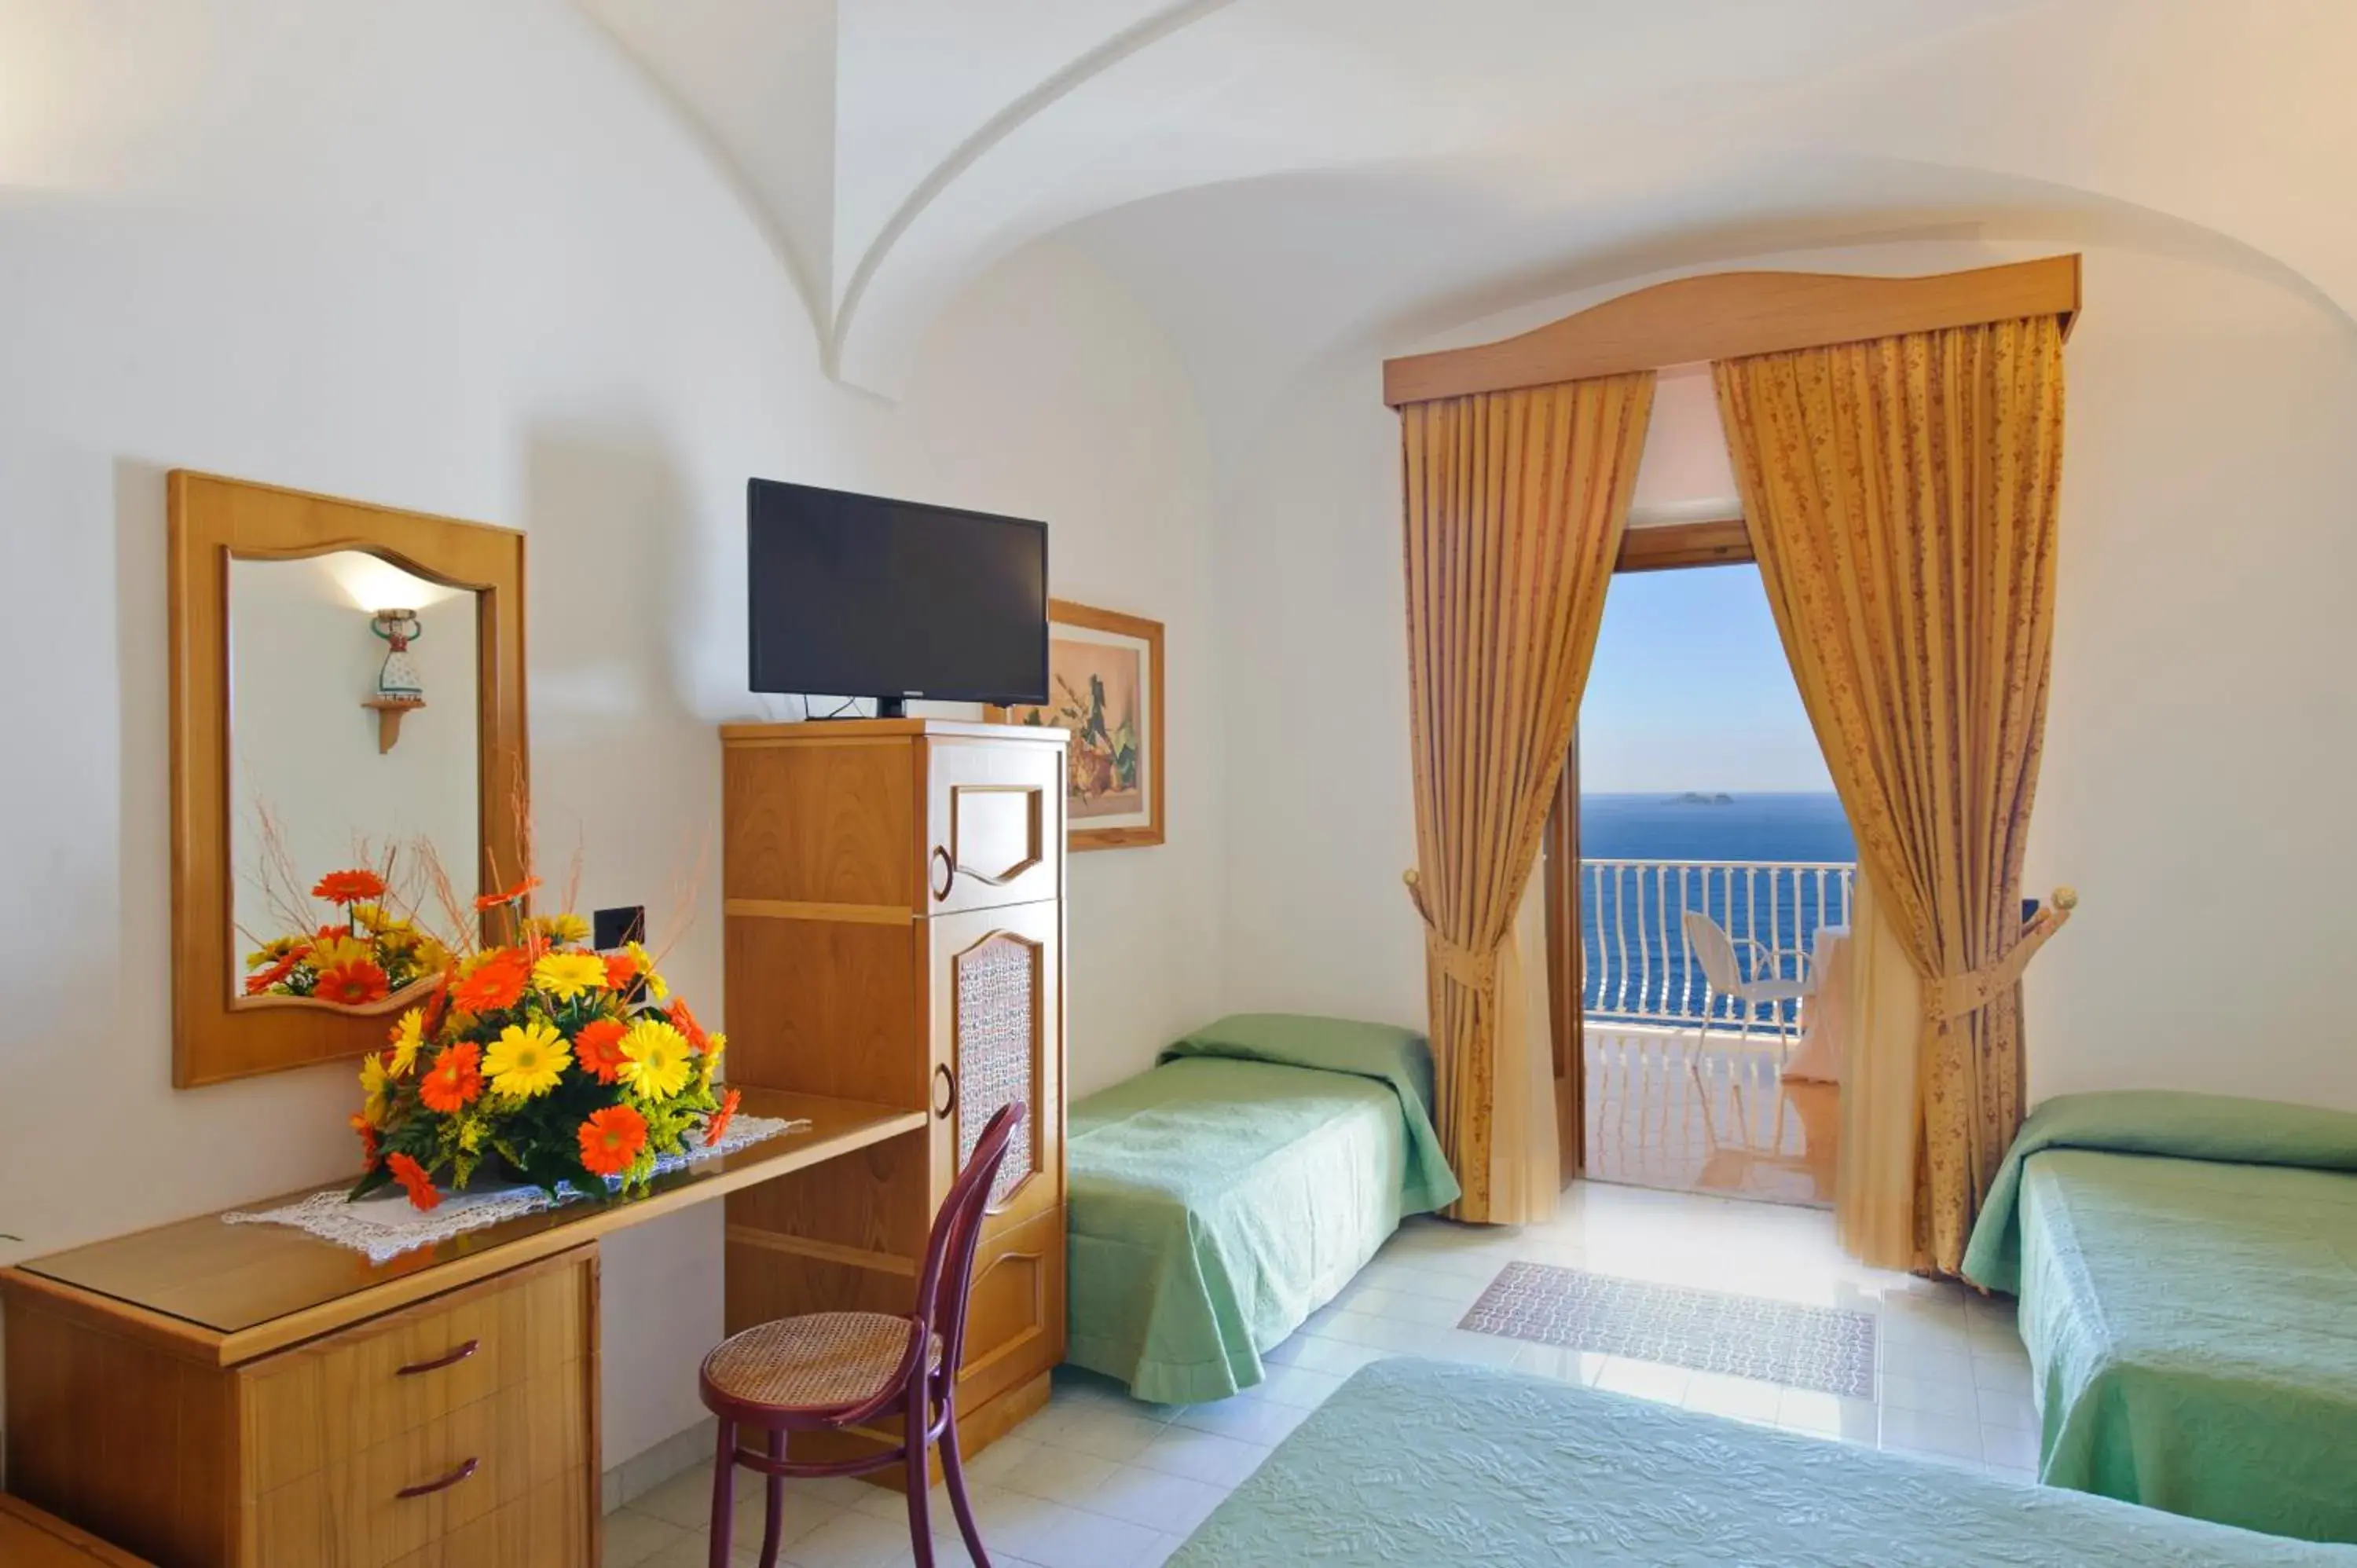 Classic Quadruple Room with Terrace and Sea View in Tramonto d'Oro